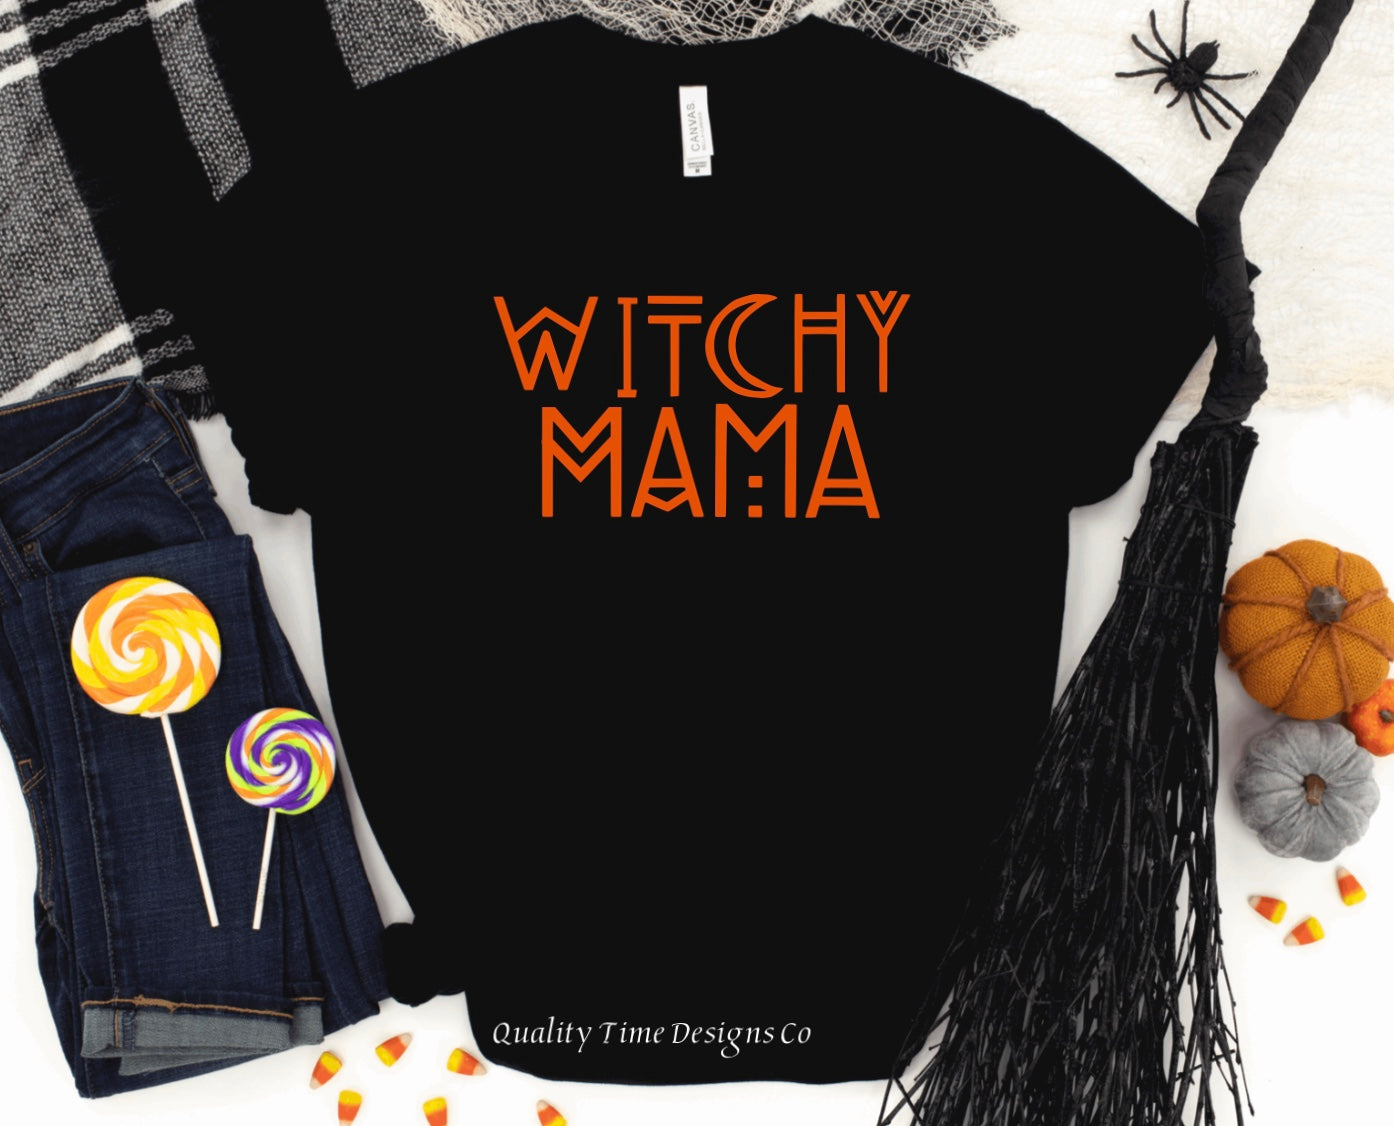 Witchy mama t-shirt 